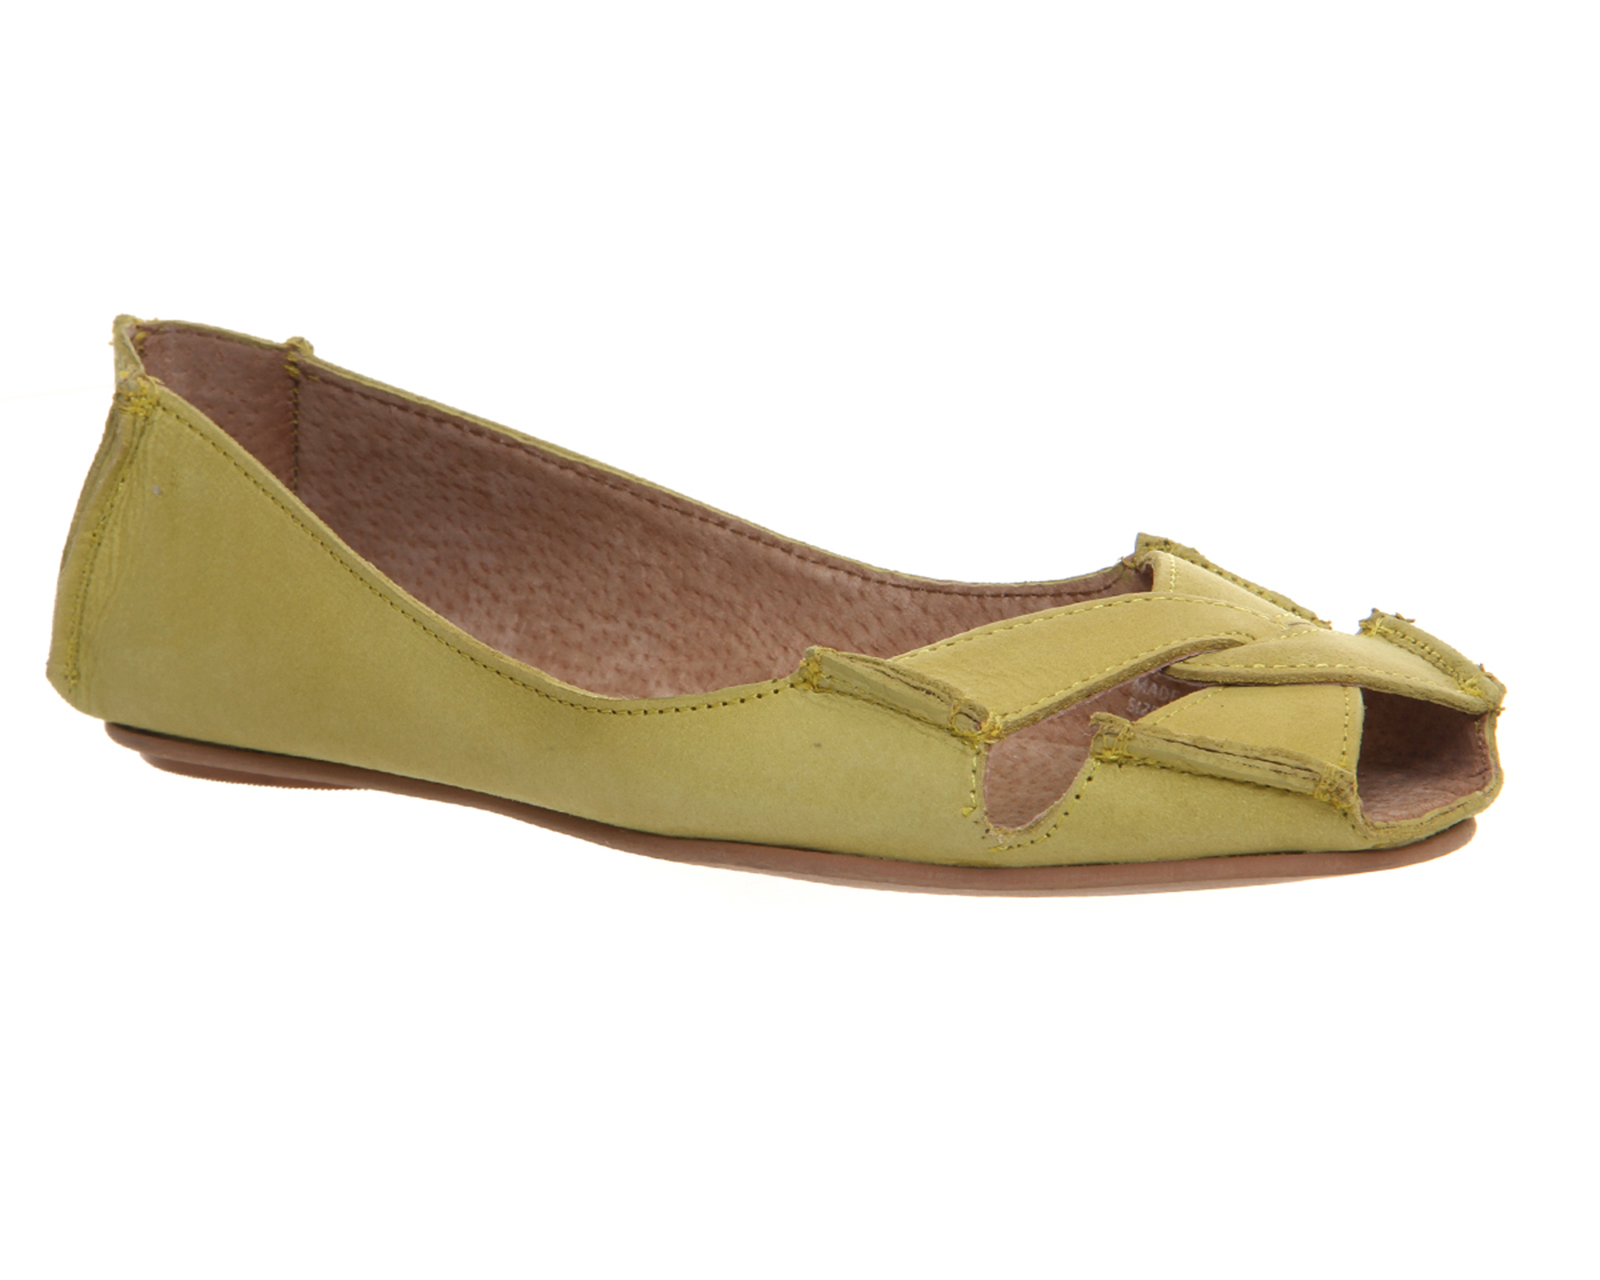 OFFICELuxe Softy Peep ShoesYellow Leather